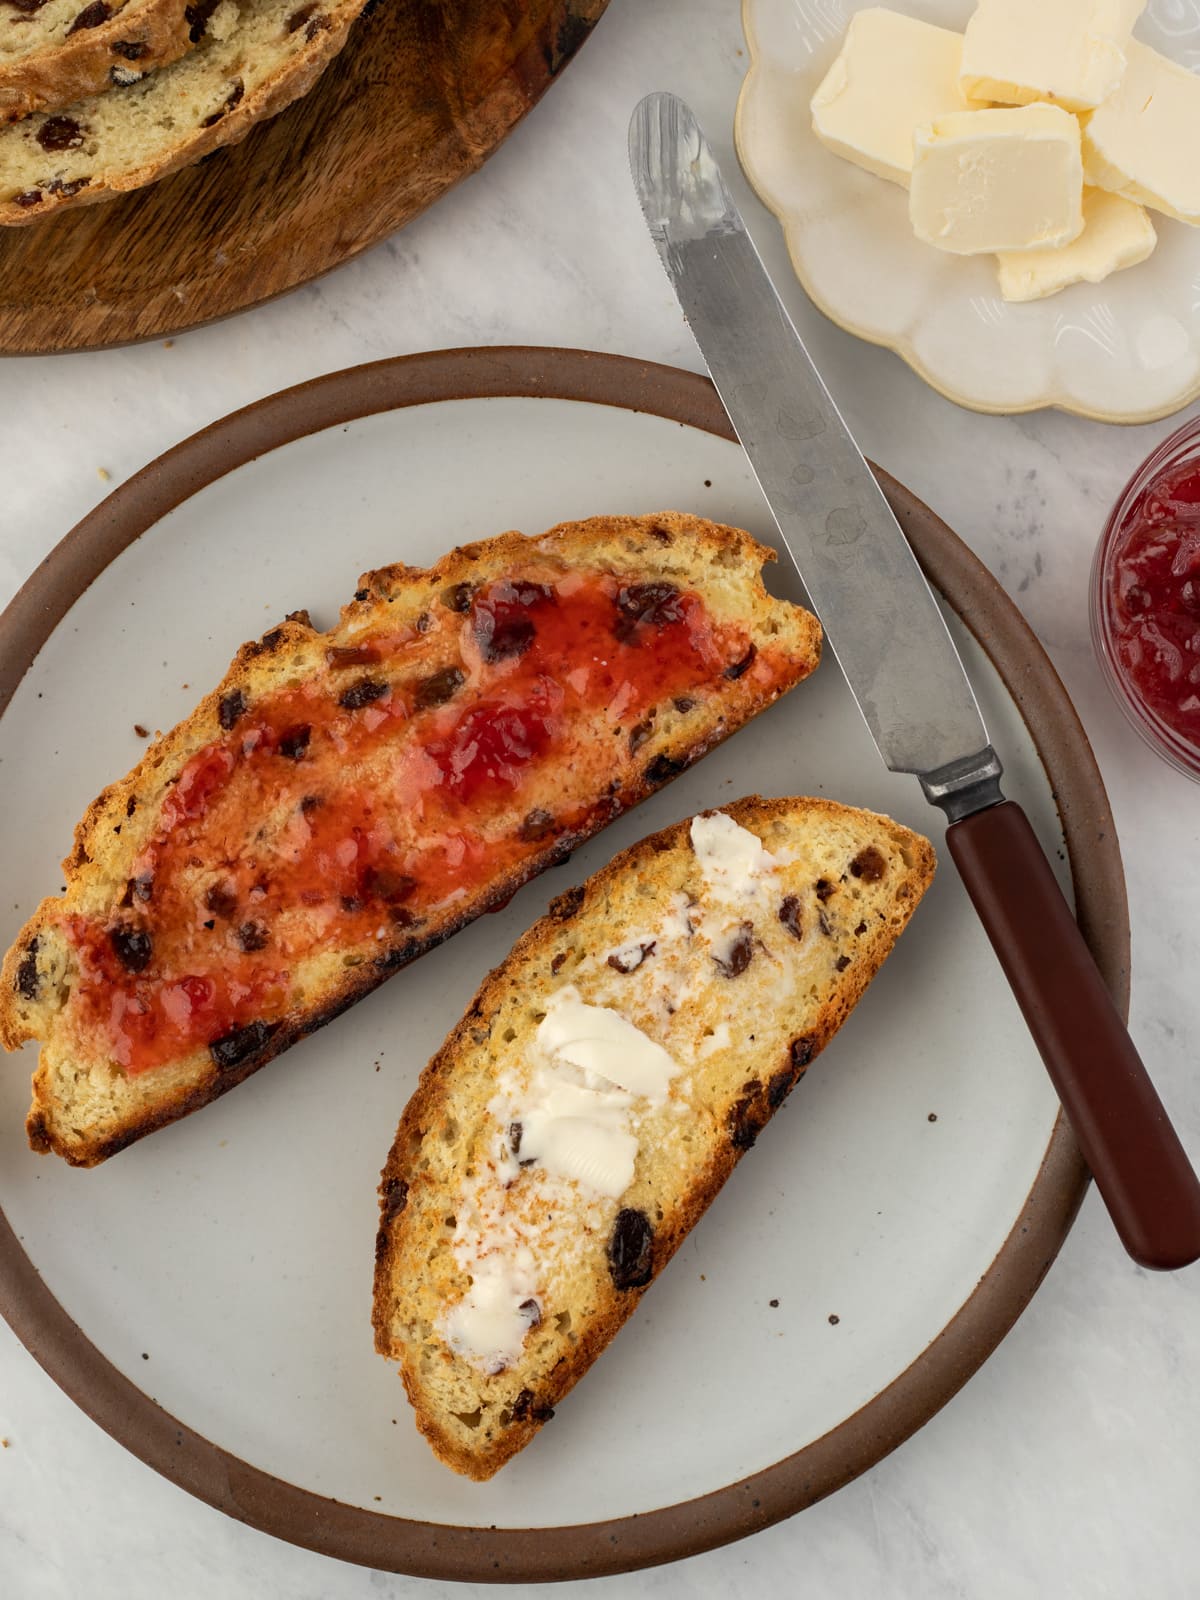 Two slices of soda bread slathered in butter and strawberry jam on a plate.